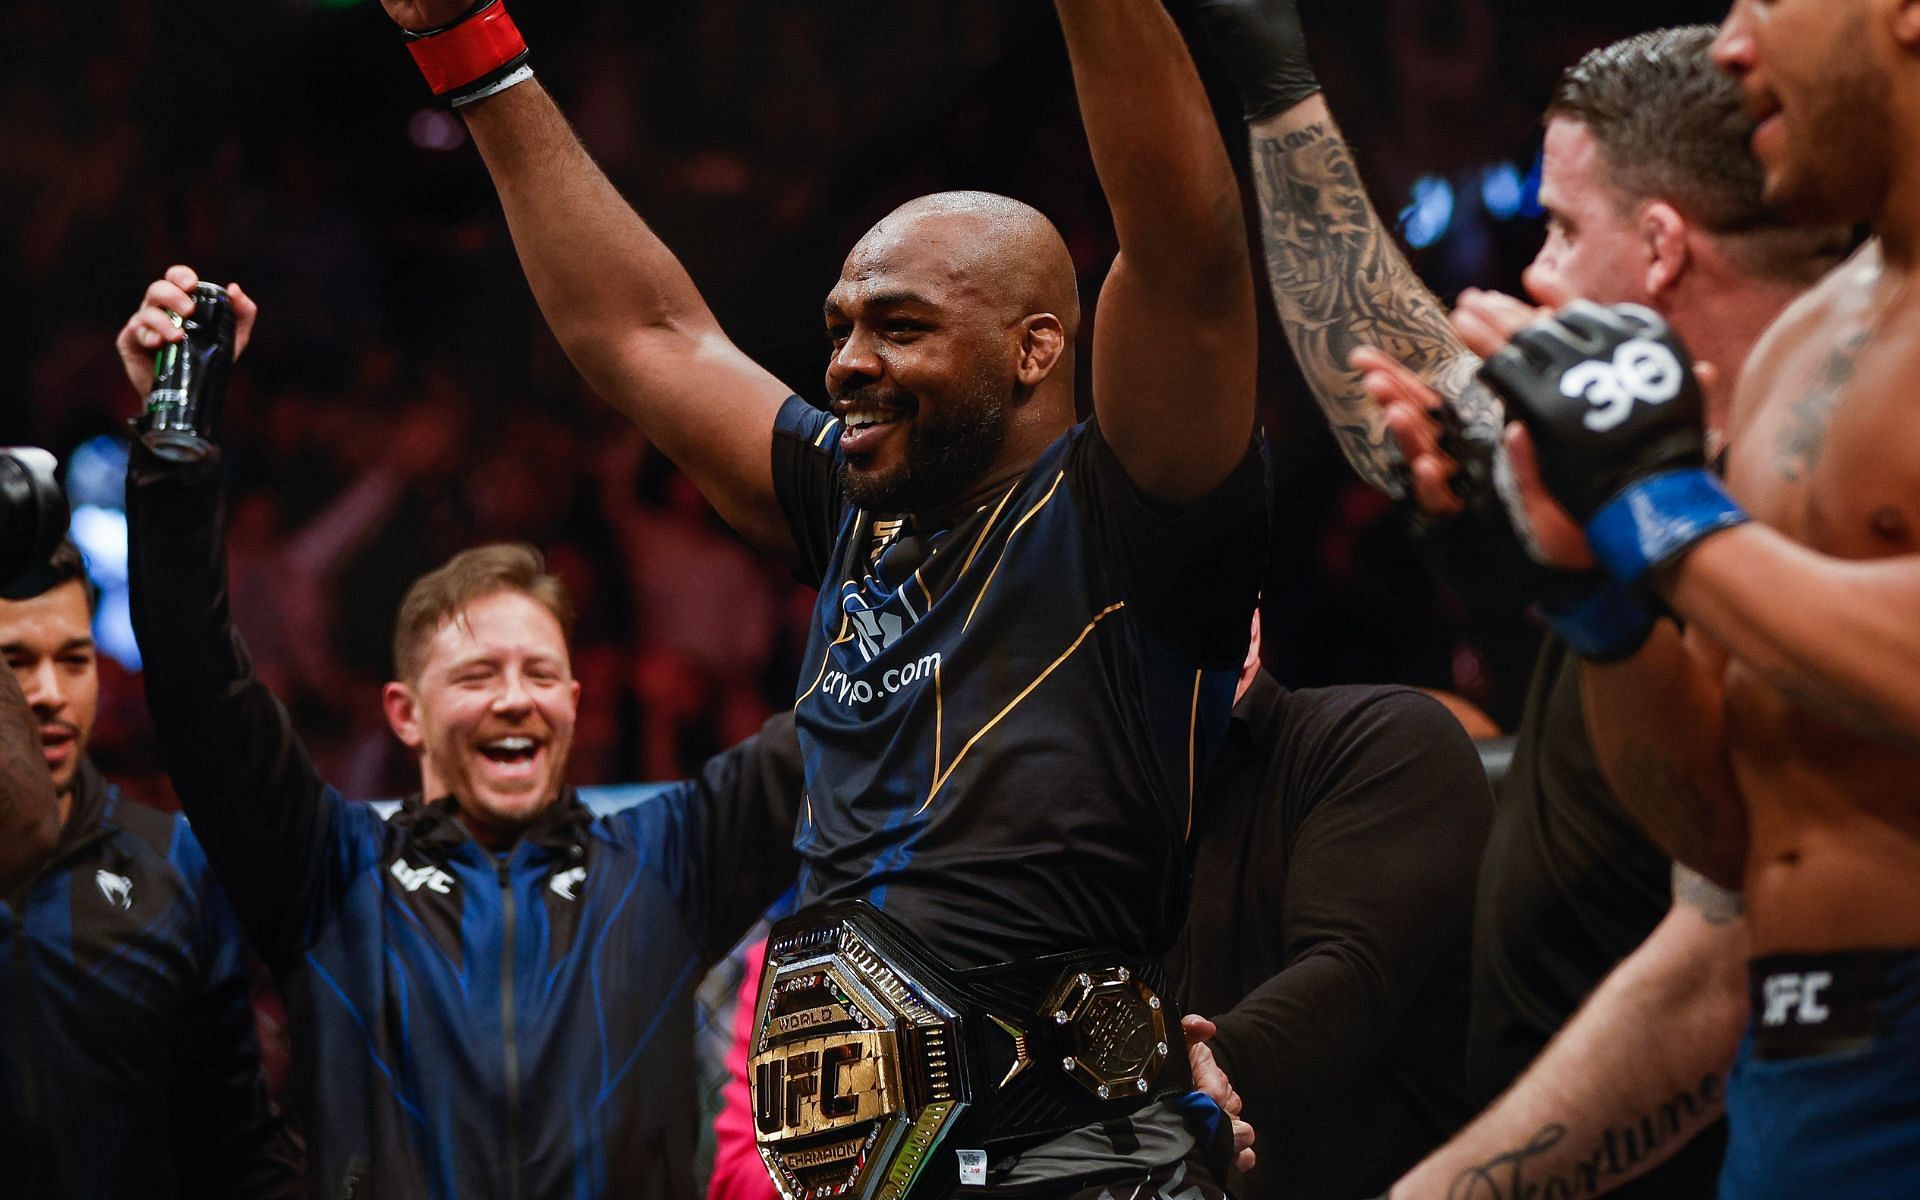 UFC Breaks A Live Gate Record, Posting A 653.6% Increase At